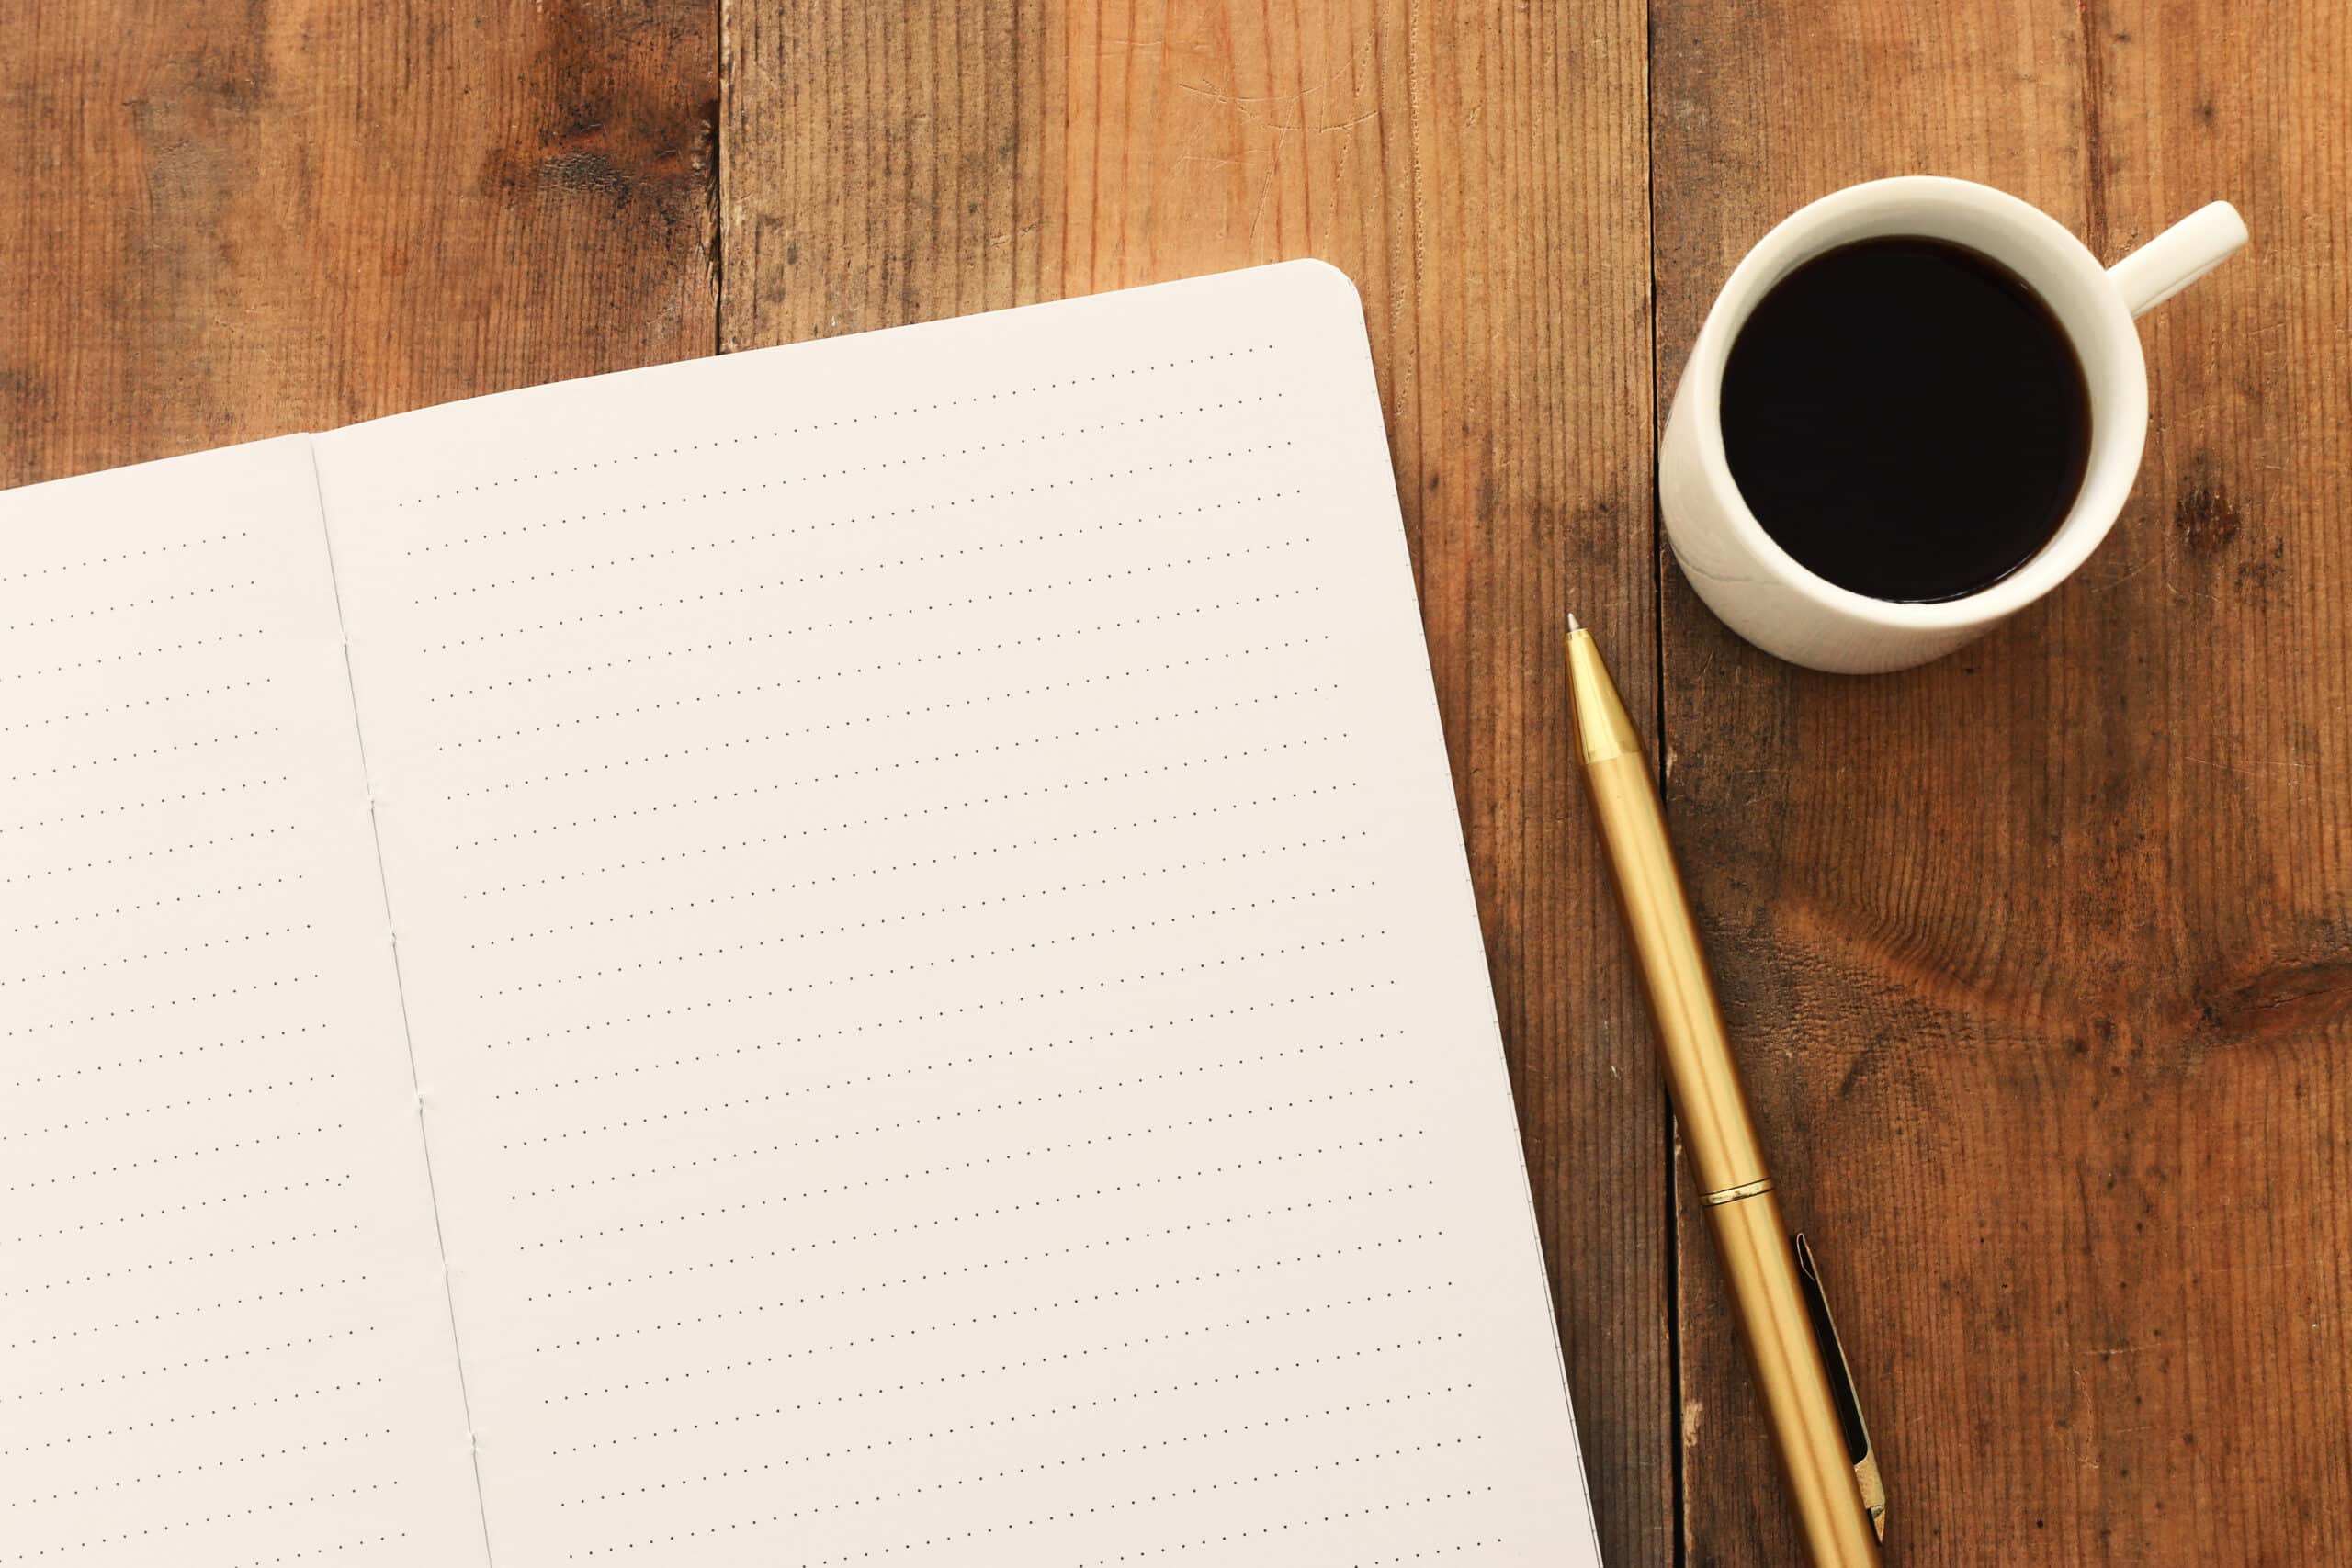 open notebook with blank pages next to cup of coffee on wooden table.